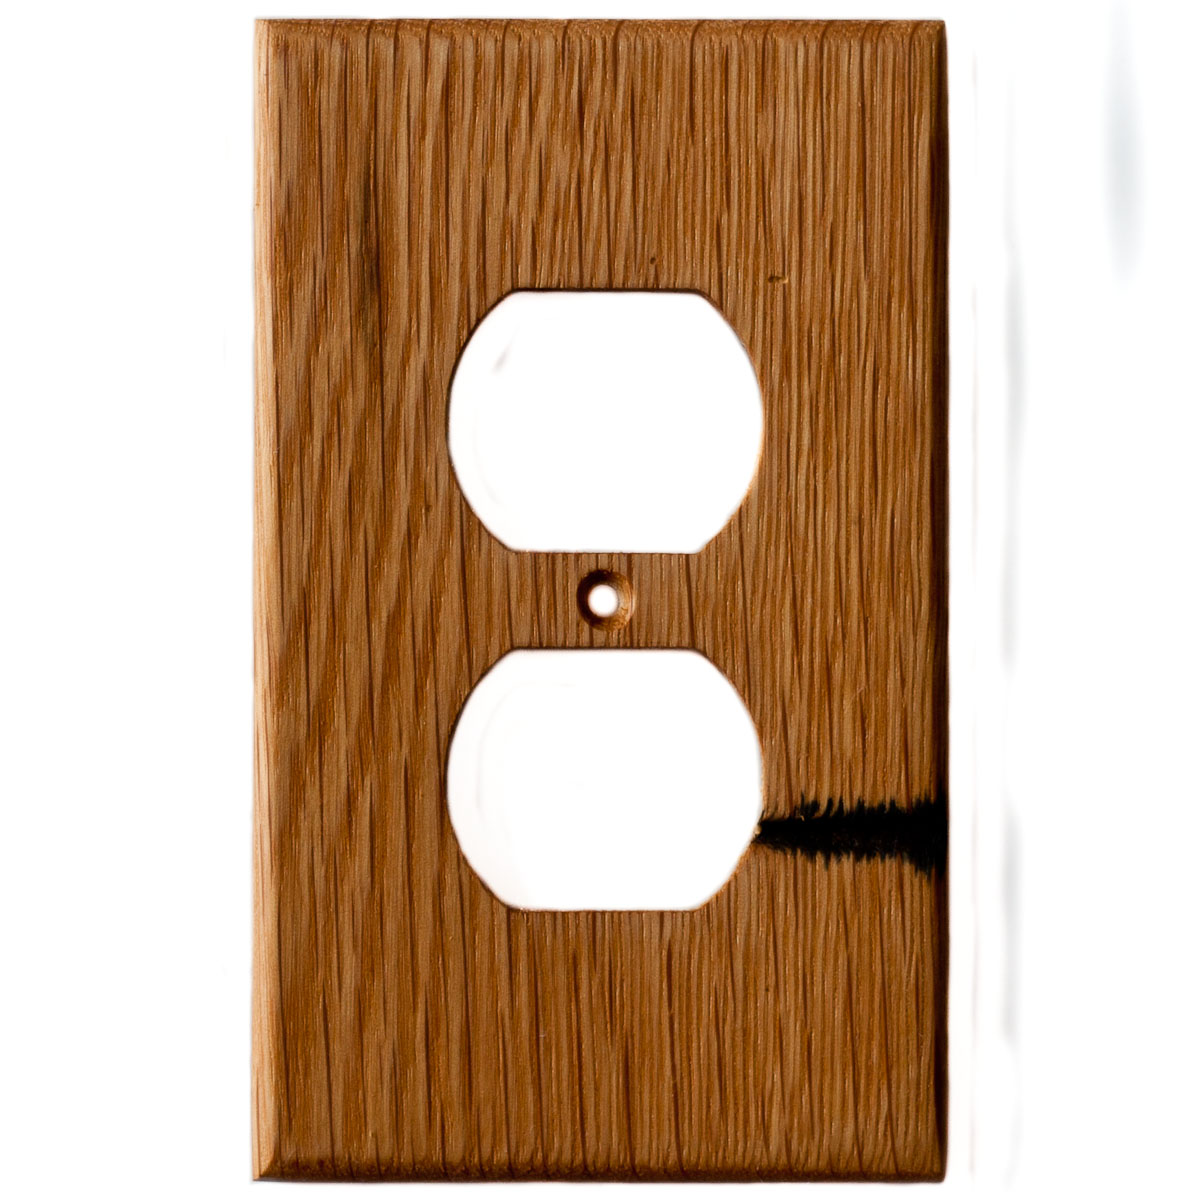 Rustic Barn Wood Design Look Single Toggle Duplex Outlet Combo  Wall Plate 